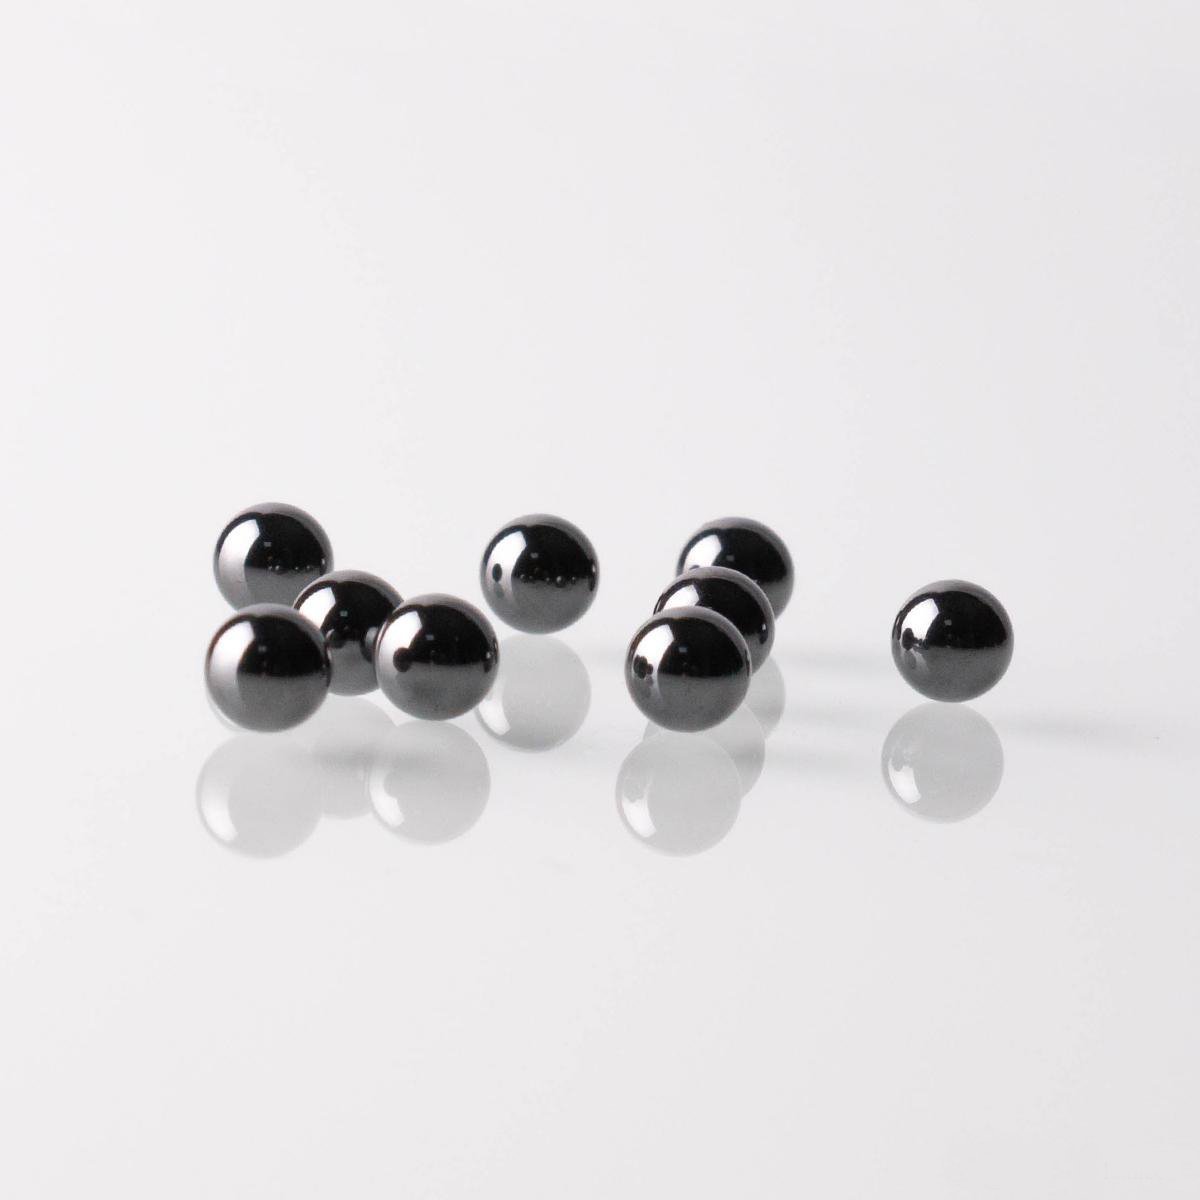 SiC Terp Pearls 6mm Silicon Carbide Banger Beads - 2 pieces